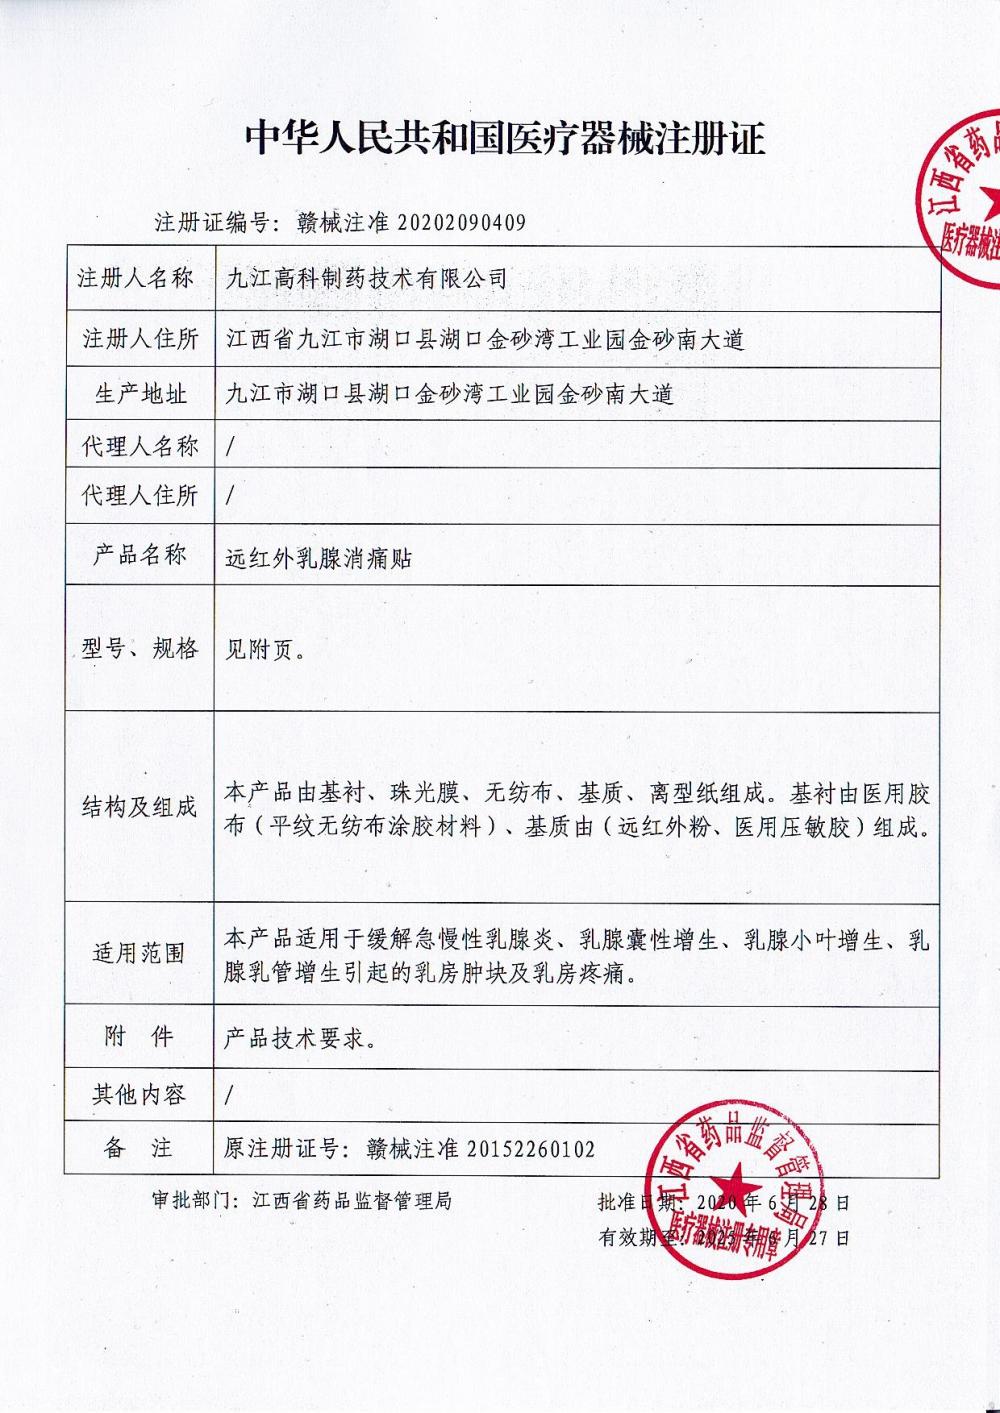 Medical Device Registration Certificate of the People's Republic of China